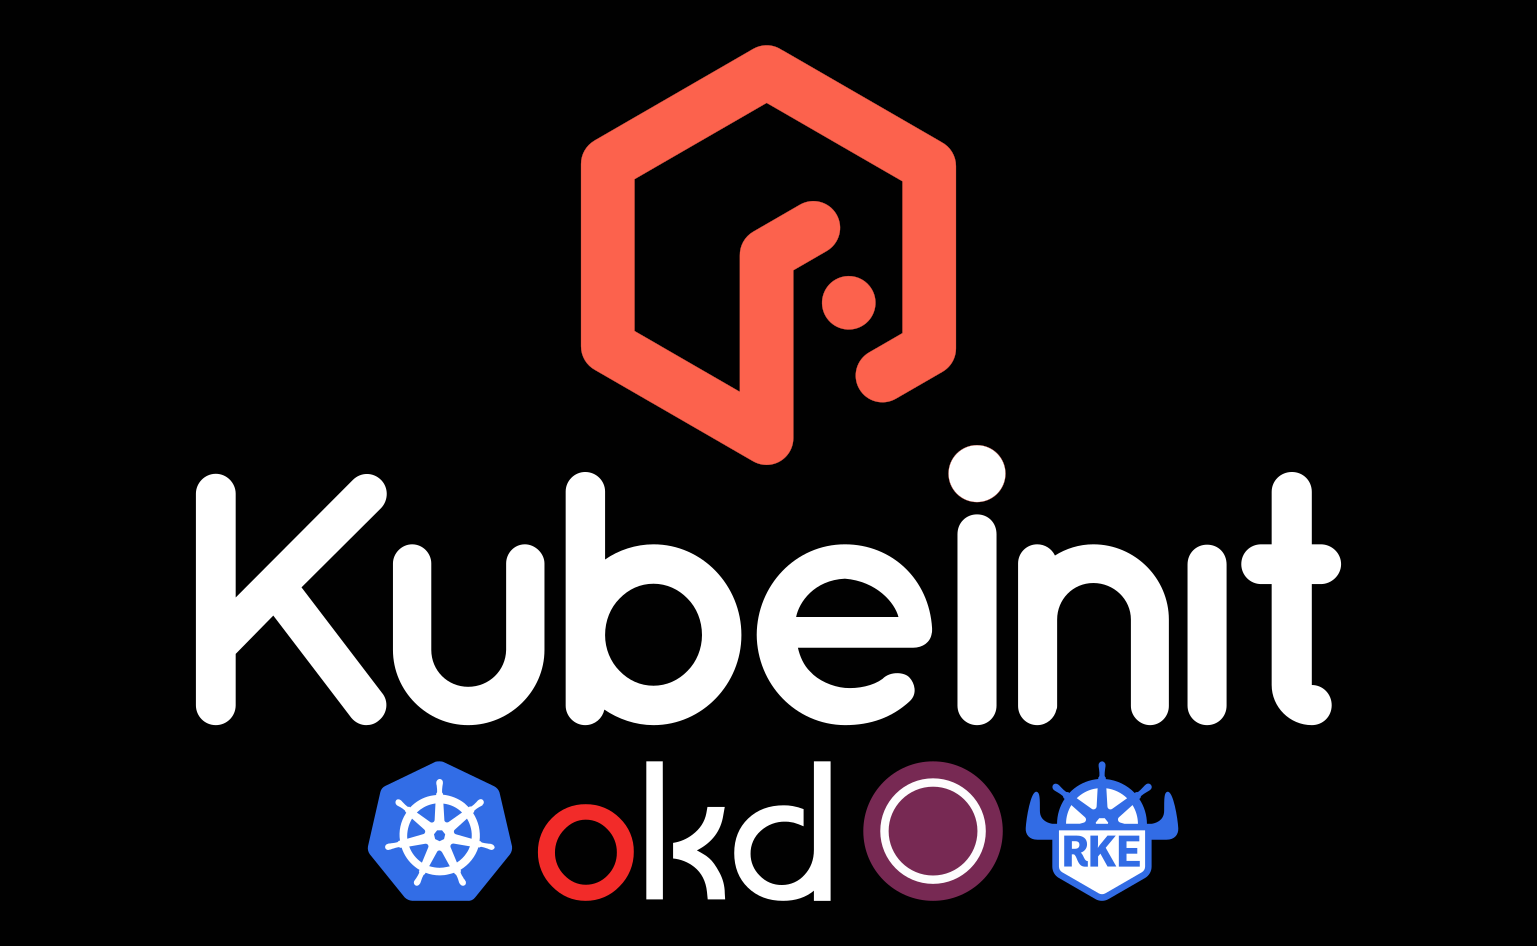 KubeInit 4-in-1 - Deploying multiple Kubernetes distributions (K8S, OKD, RKE, and CDK) with the same platform